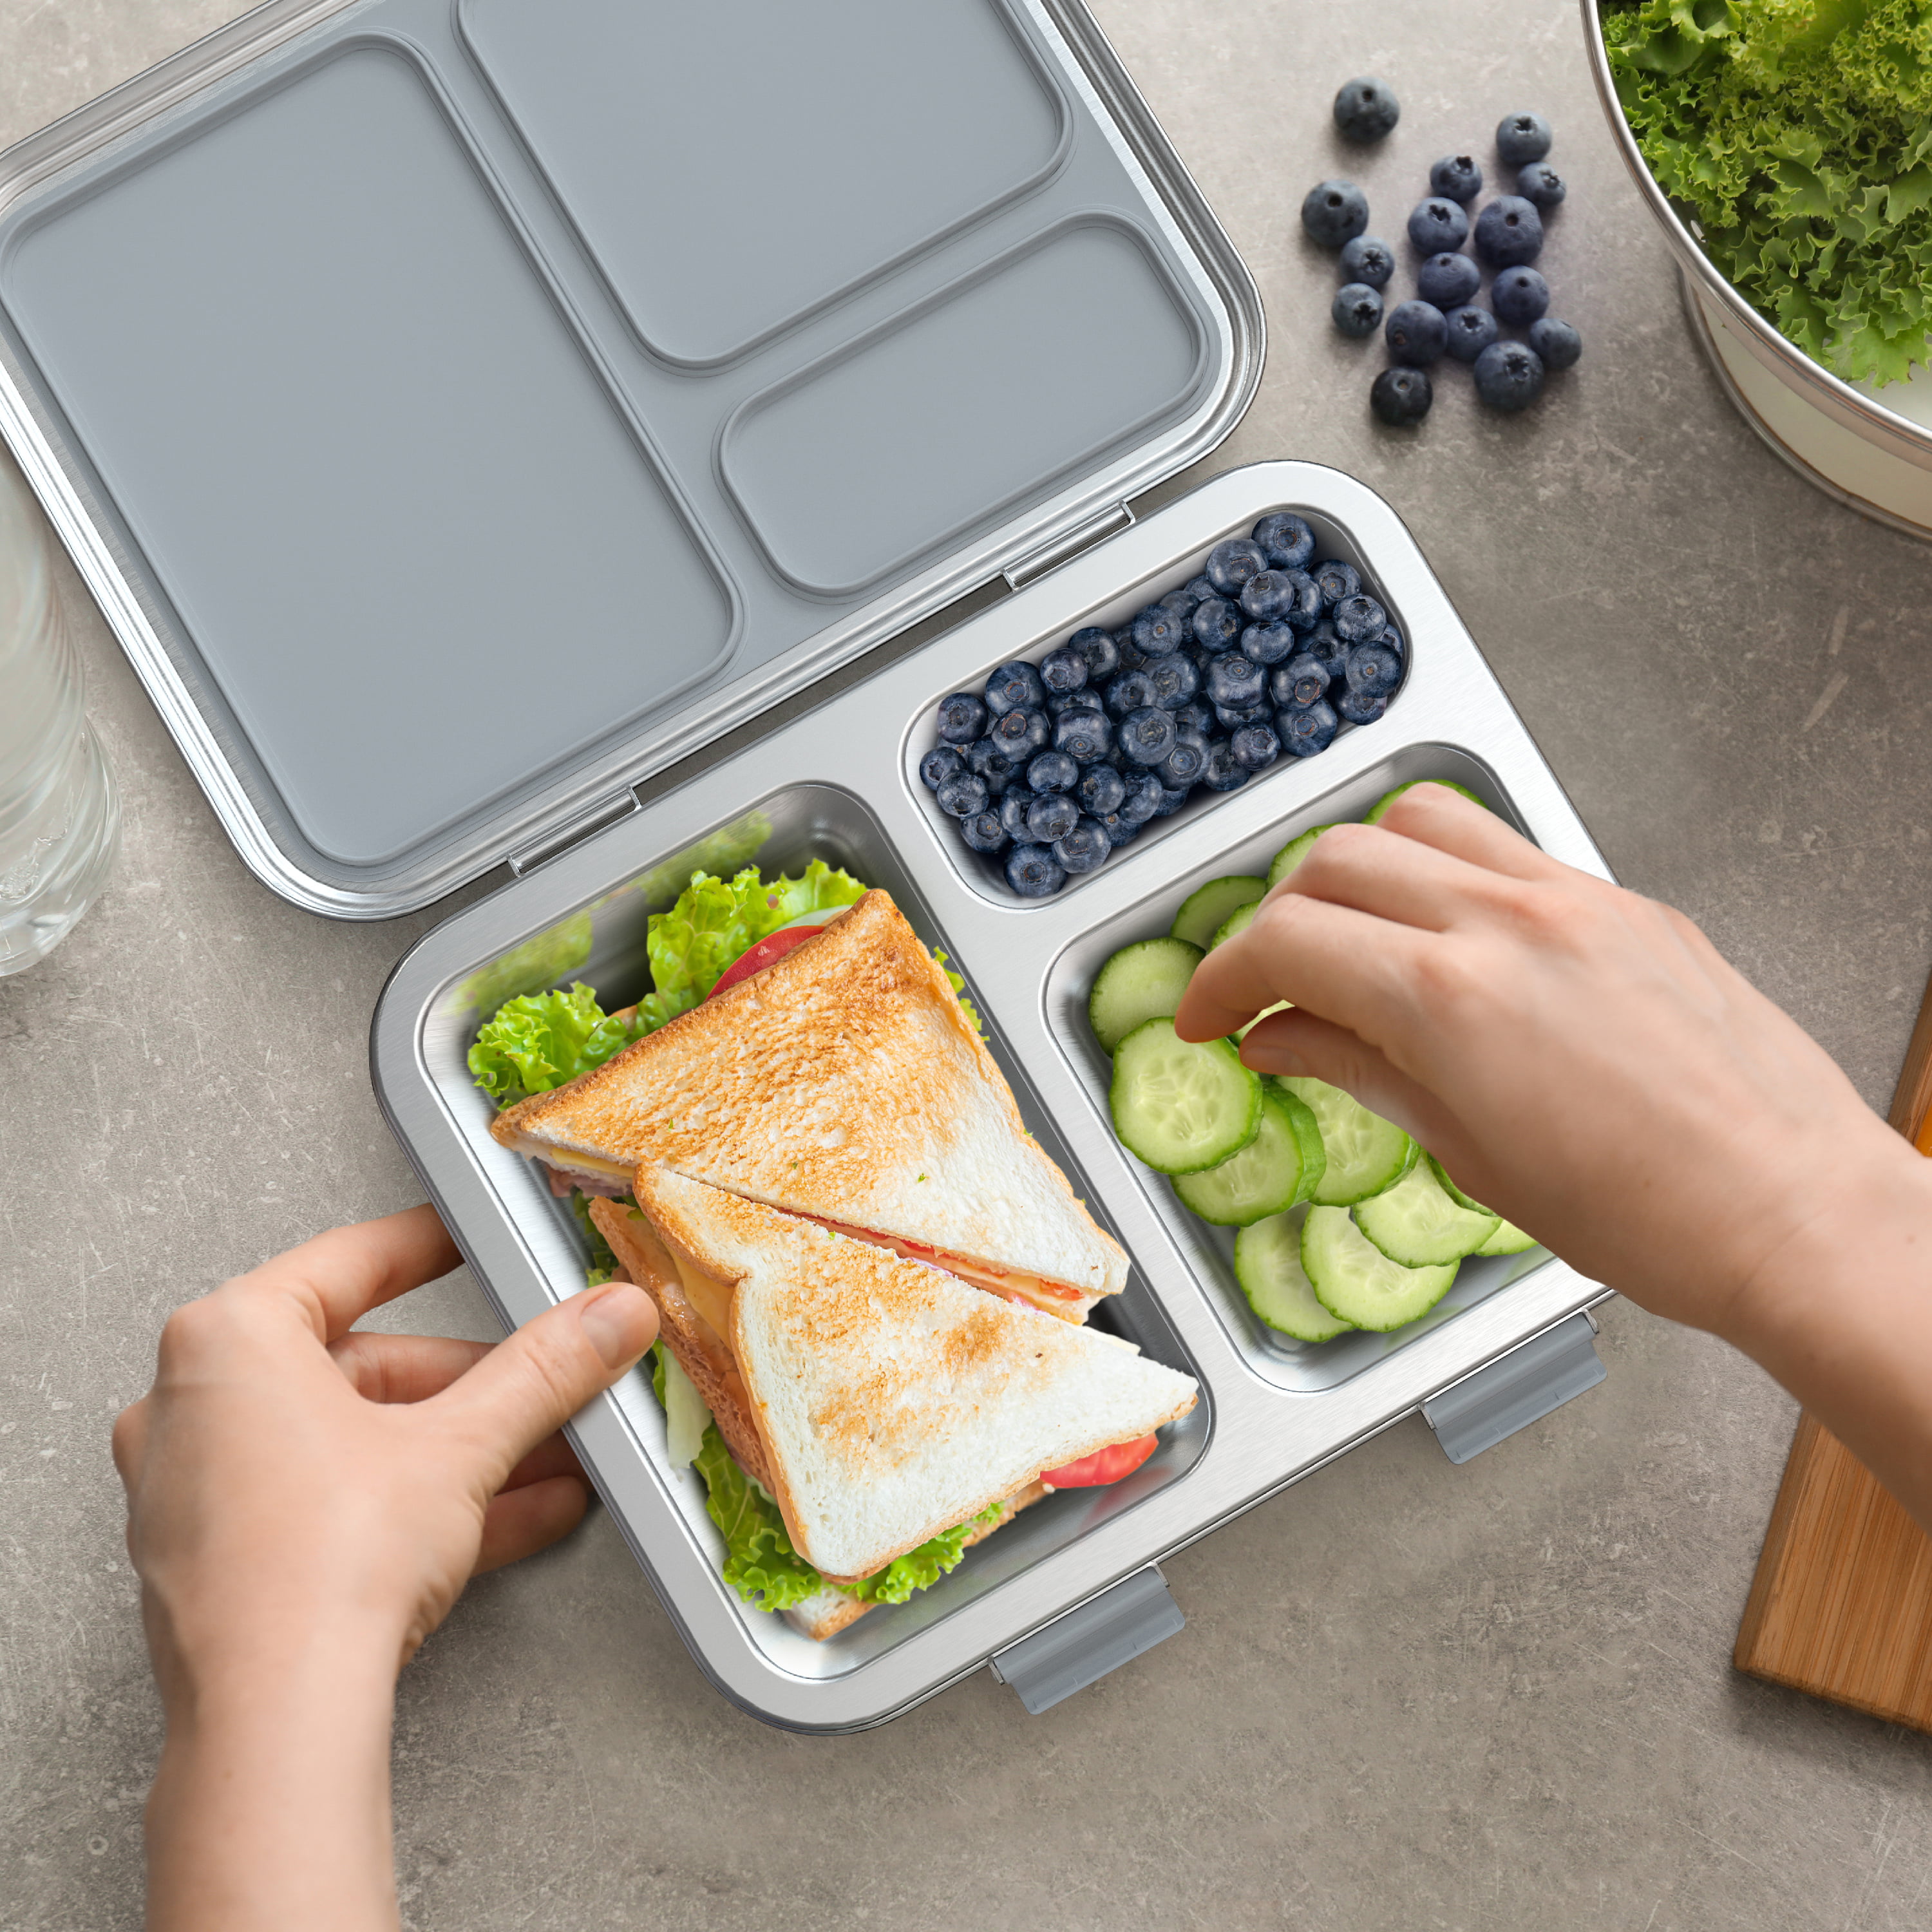 Bentgo® Stainless Steel  Stainless Steel Lunch Boxes